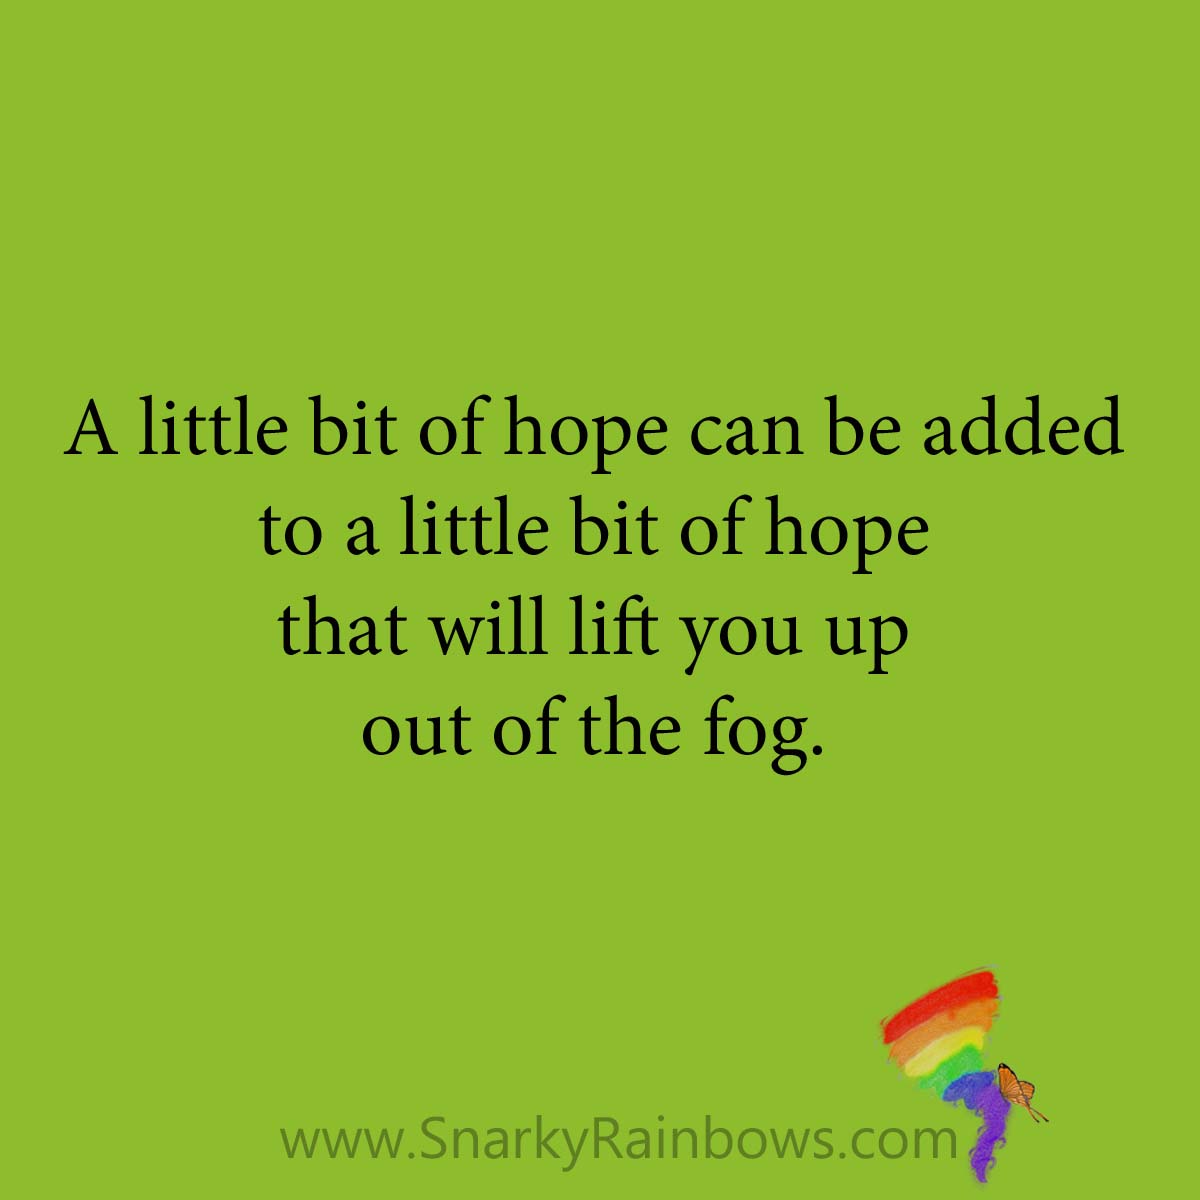 quote - lift you up out of the fog